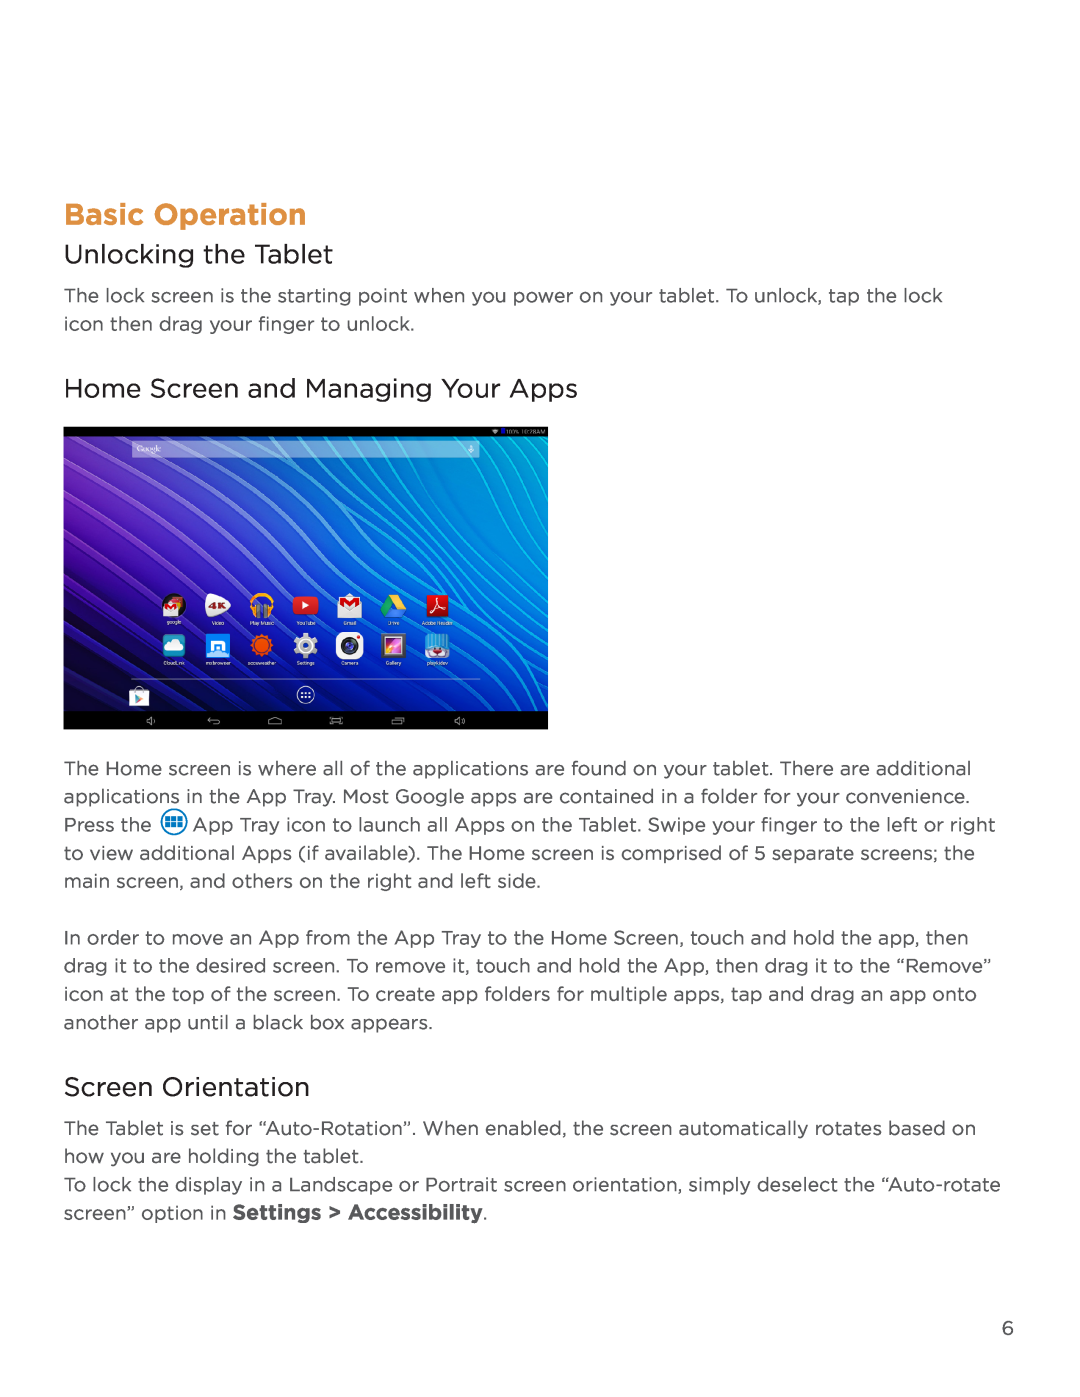 NuVision TM800A520L Basic Operation, Unlocking the Tablet, Home Screen and Managing Your Apps, Screen Orientation 